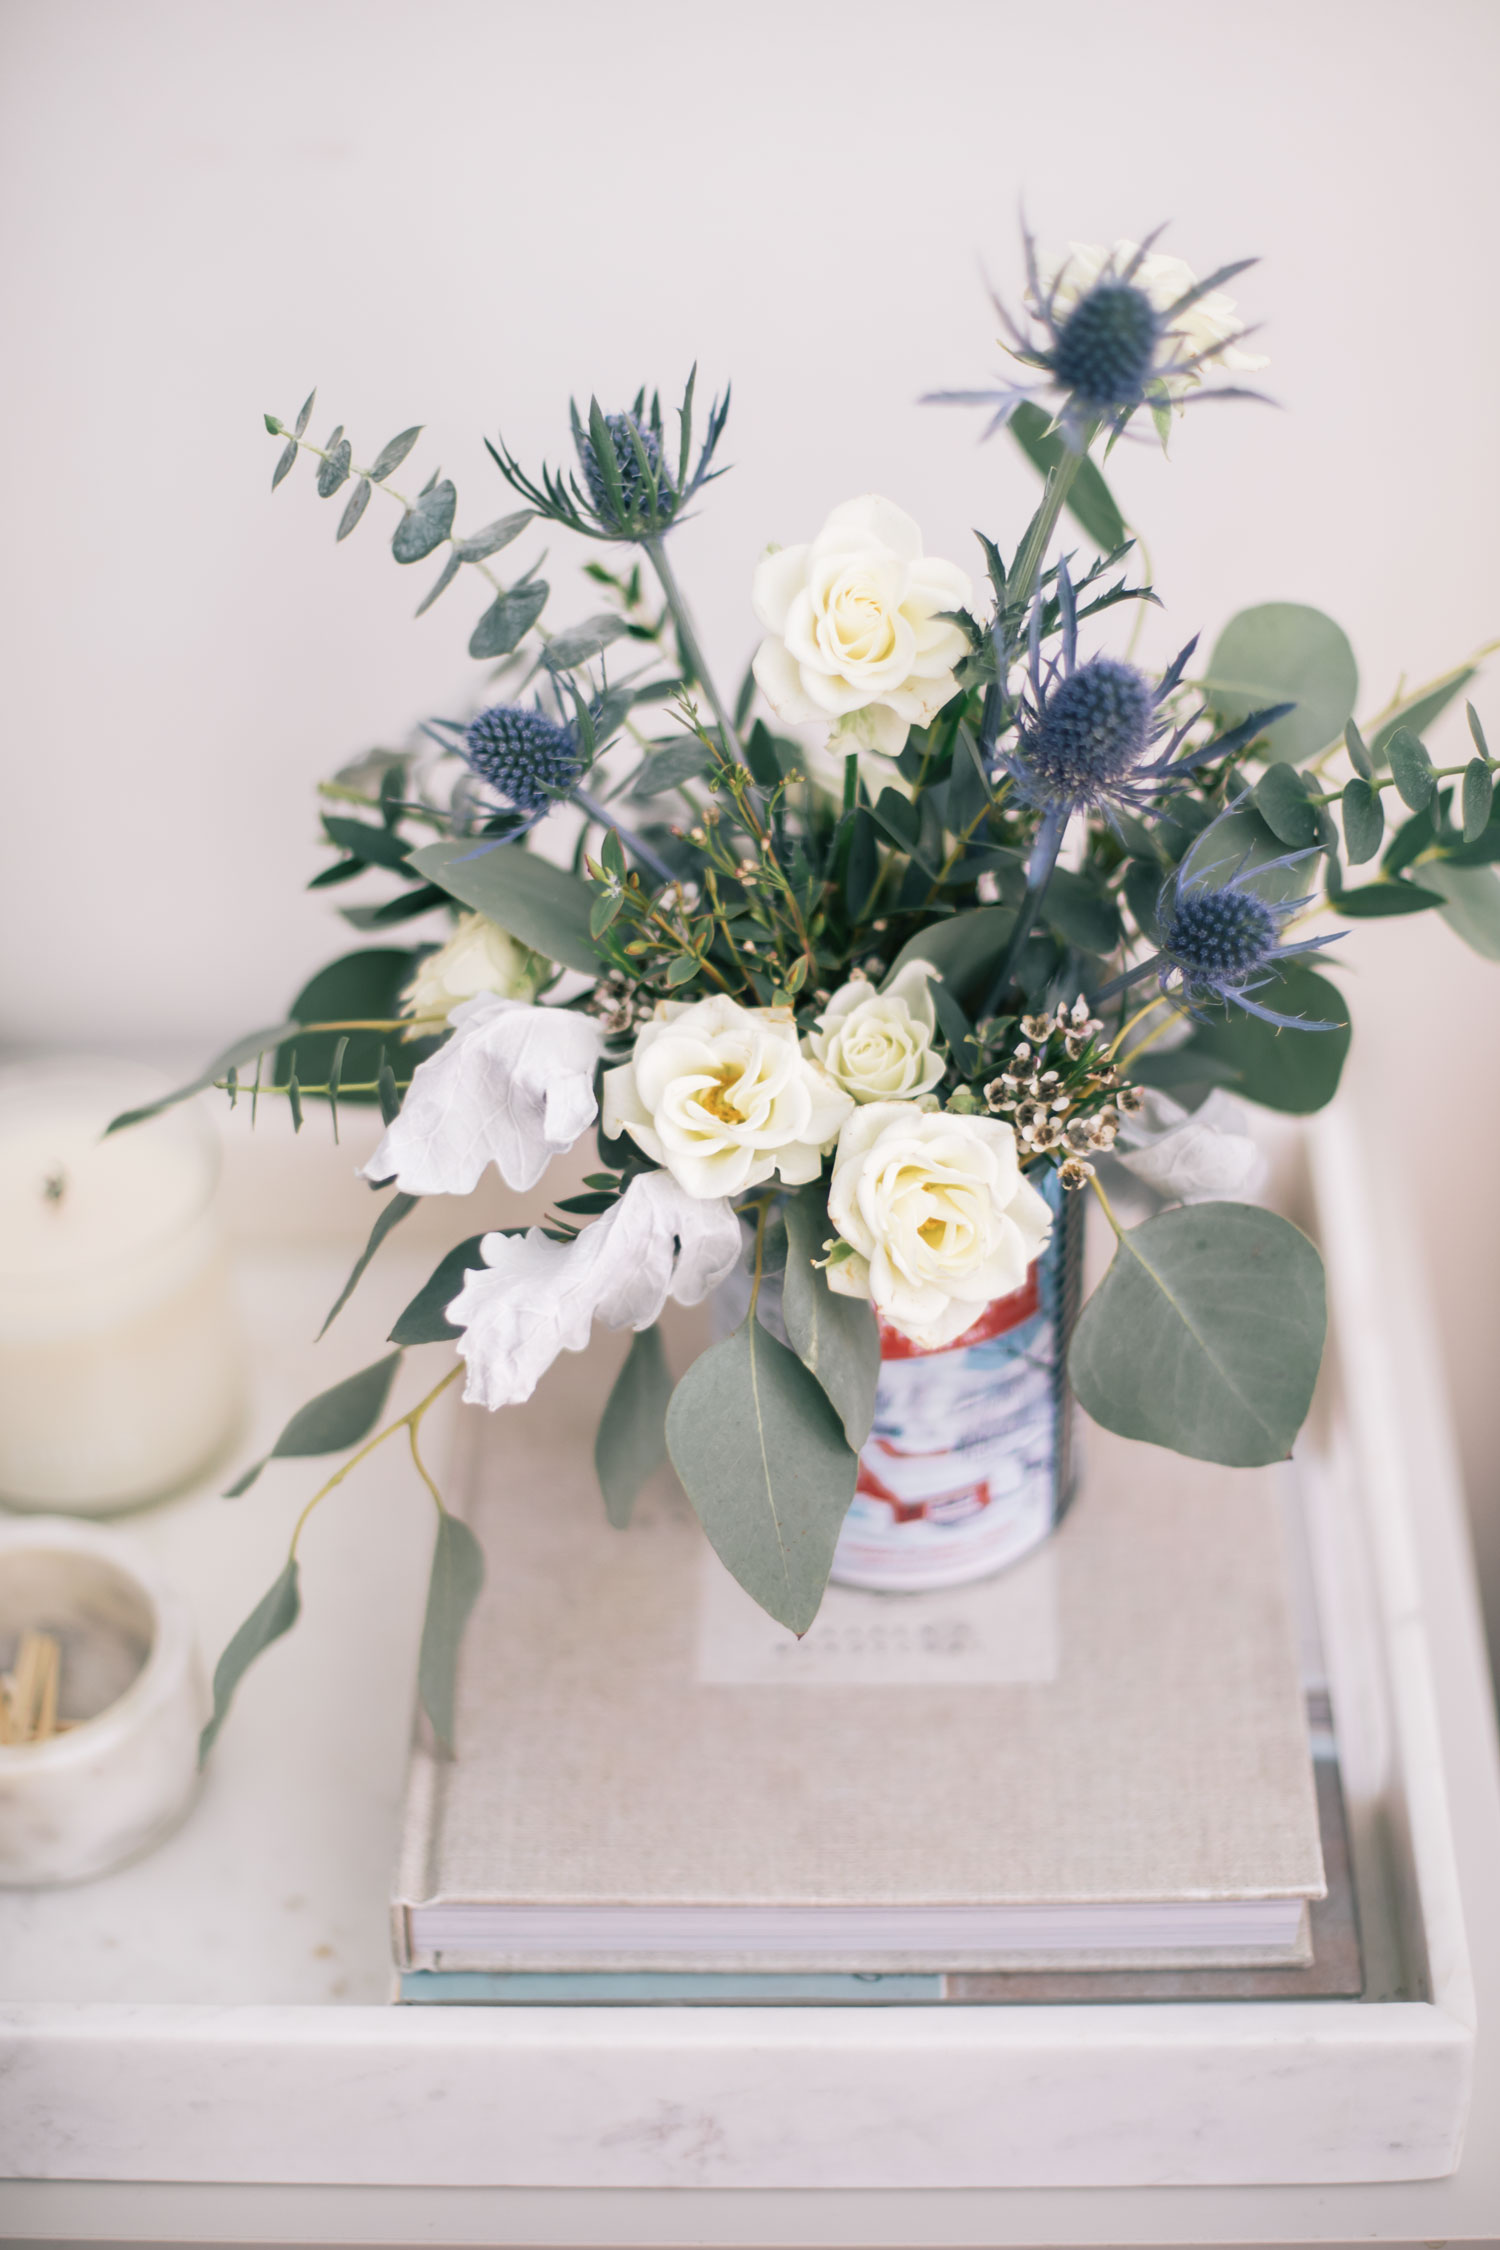 DIY WINTER FLORAL ARRANGEMENT IN A REPURPOSED TIN CAN, The Blondielocks